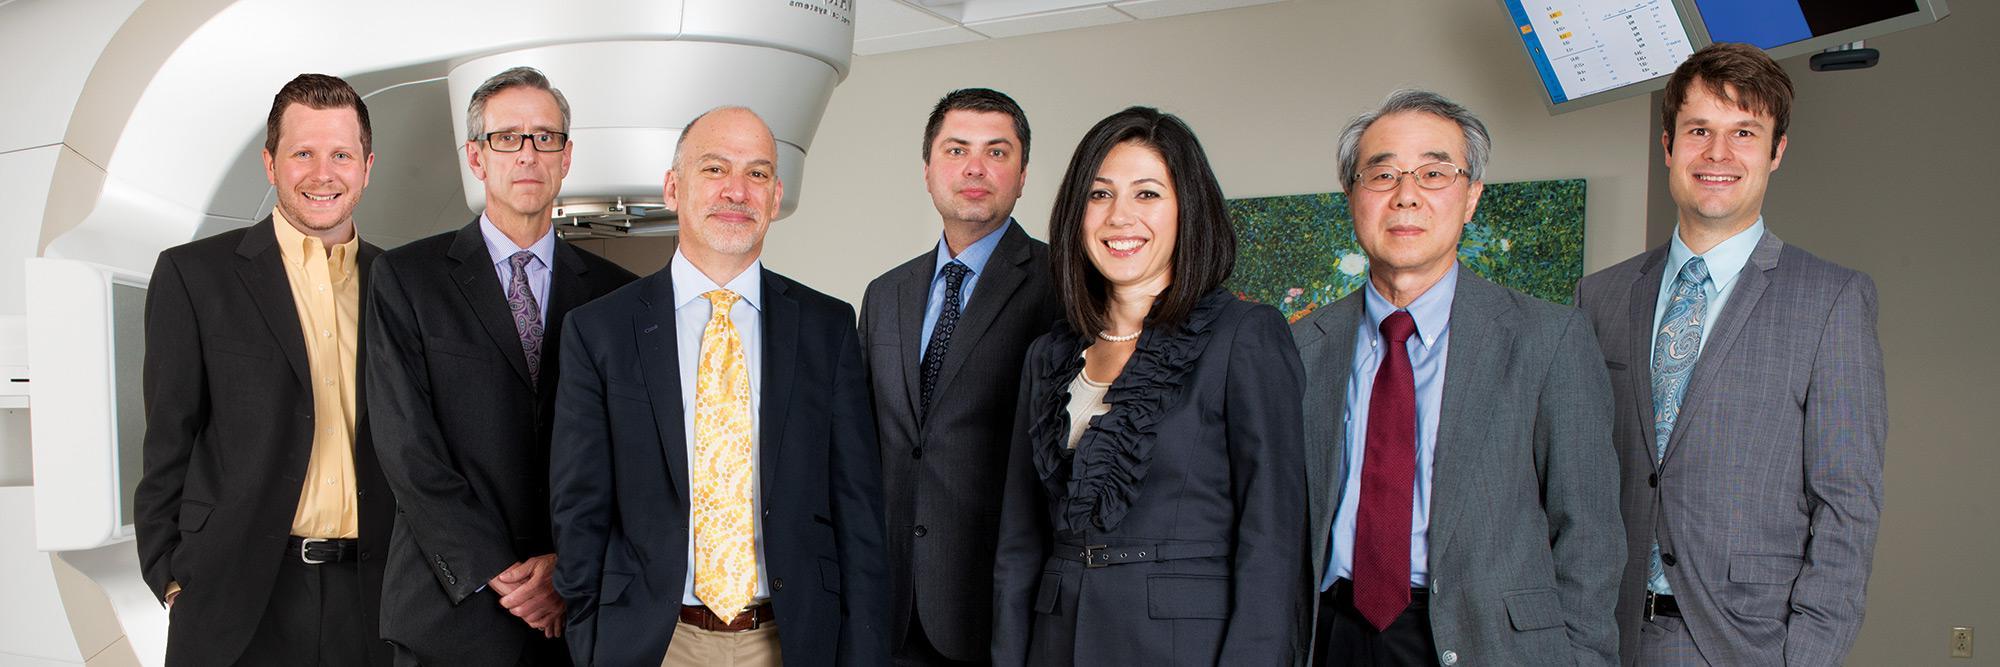 Upstate Radiation Oncology at Oneida doctors